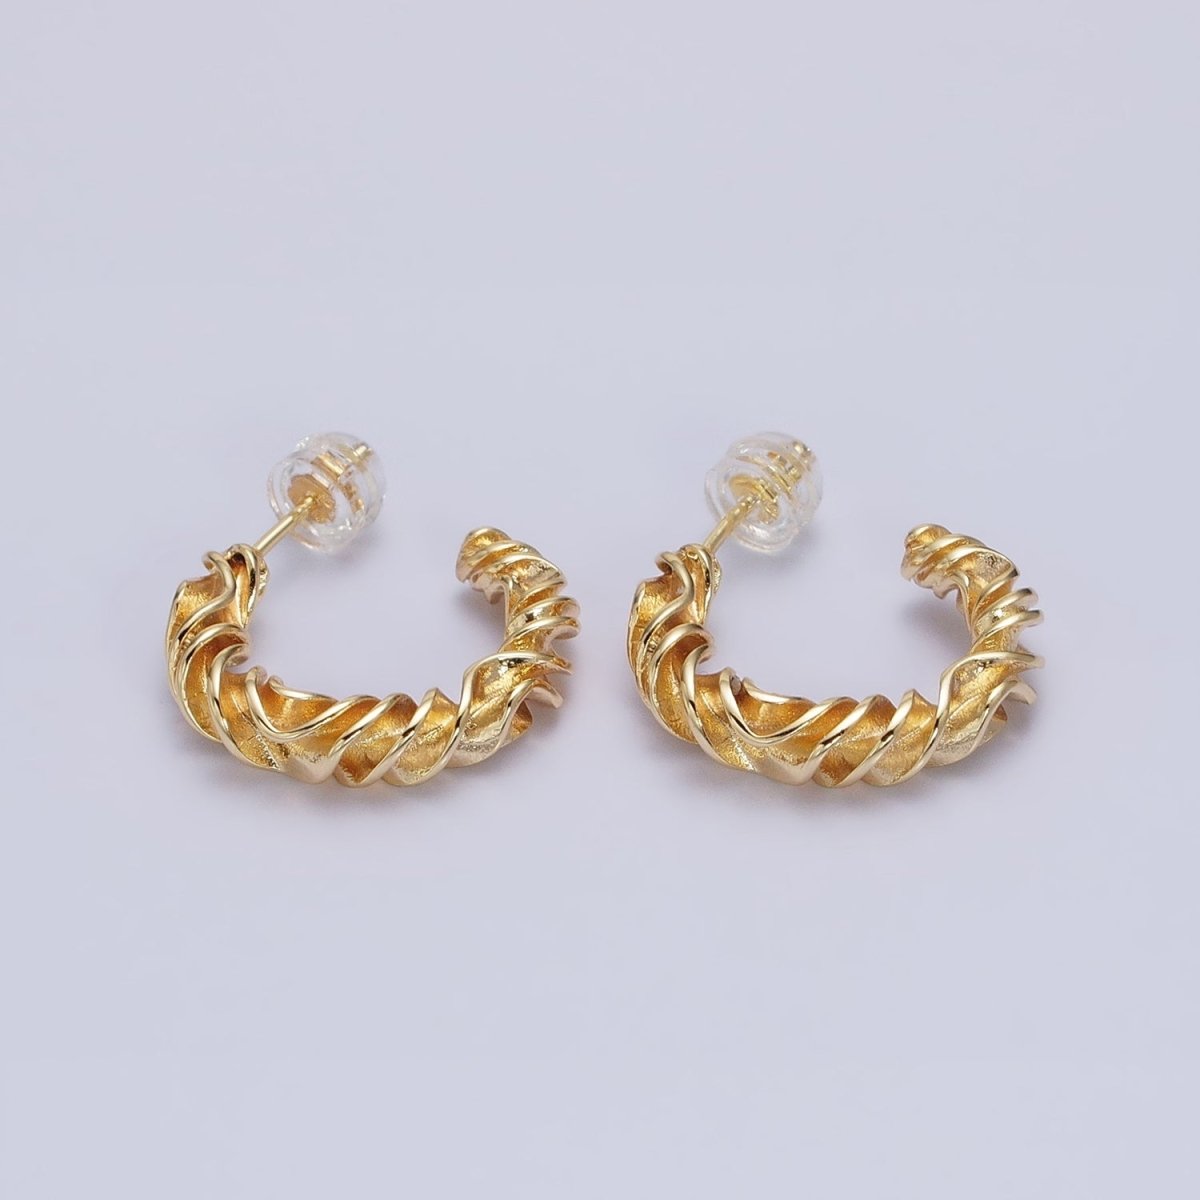 Gold, Silver 20mm Abstract Twist Foil Geometric C-Shaped Hoop Earrings | AB589 AB590 - DLUXCA